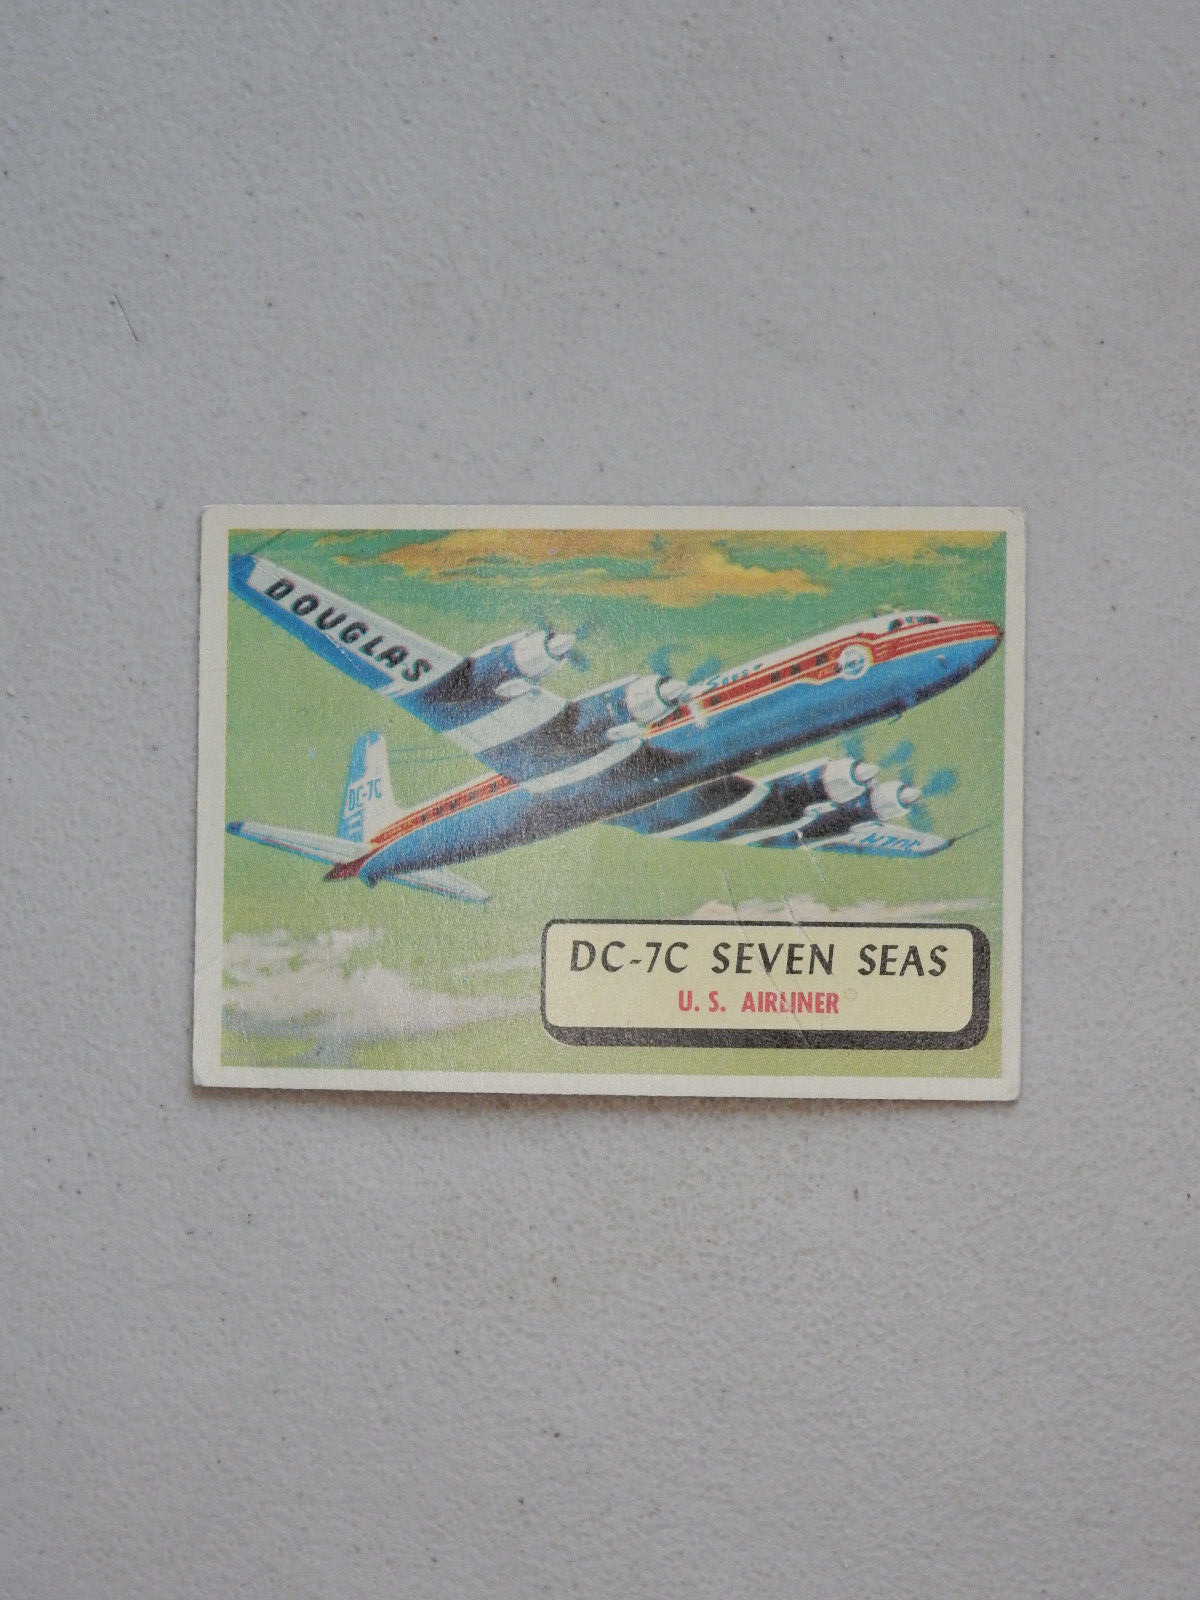 1957 Topps Airplane Trading Card # 69_DC-7C Seven Seas_U.S. Airliner_Red Back